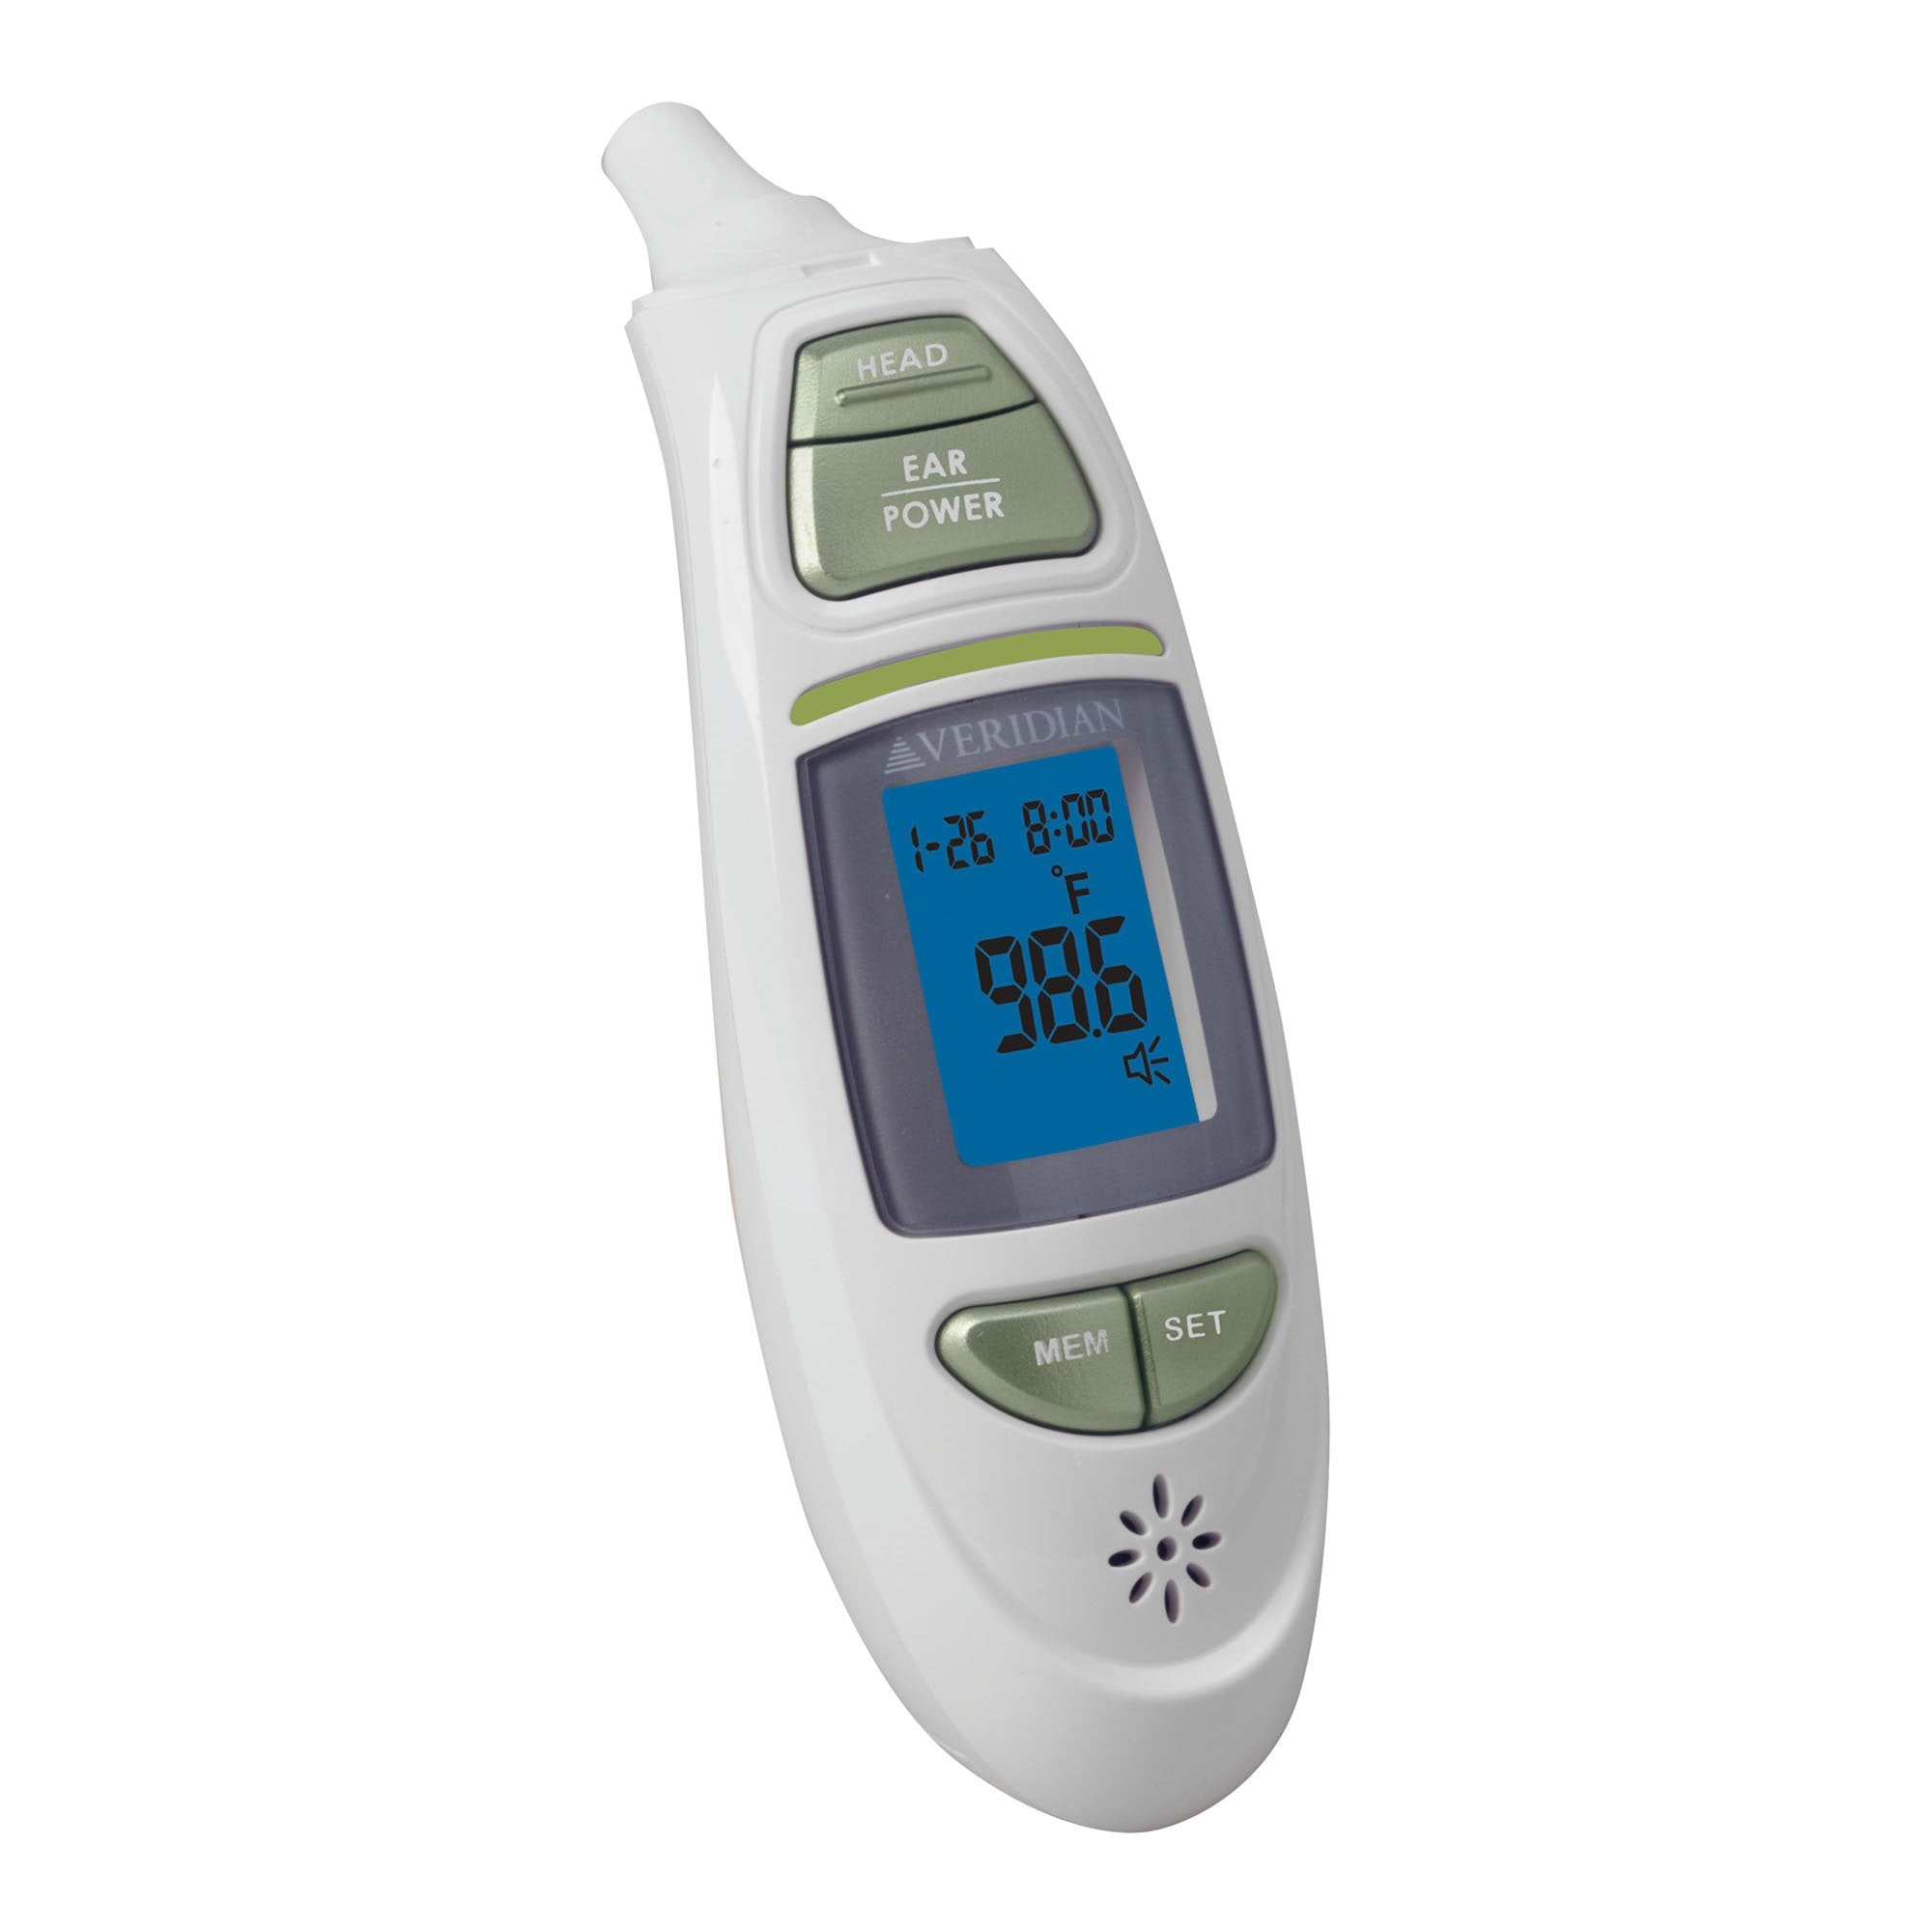 Non-Contact Skin Surface Thermometer Veridian Infrared Skin Probe Handheld